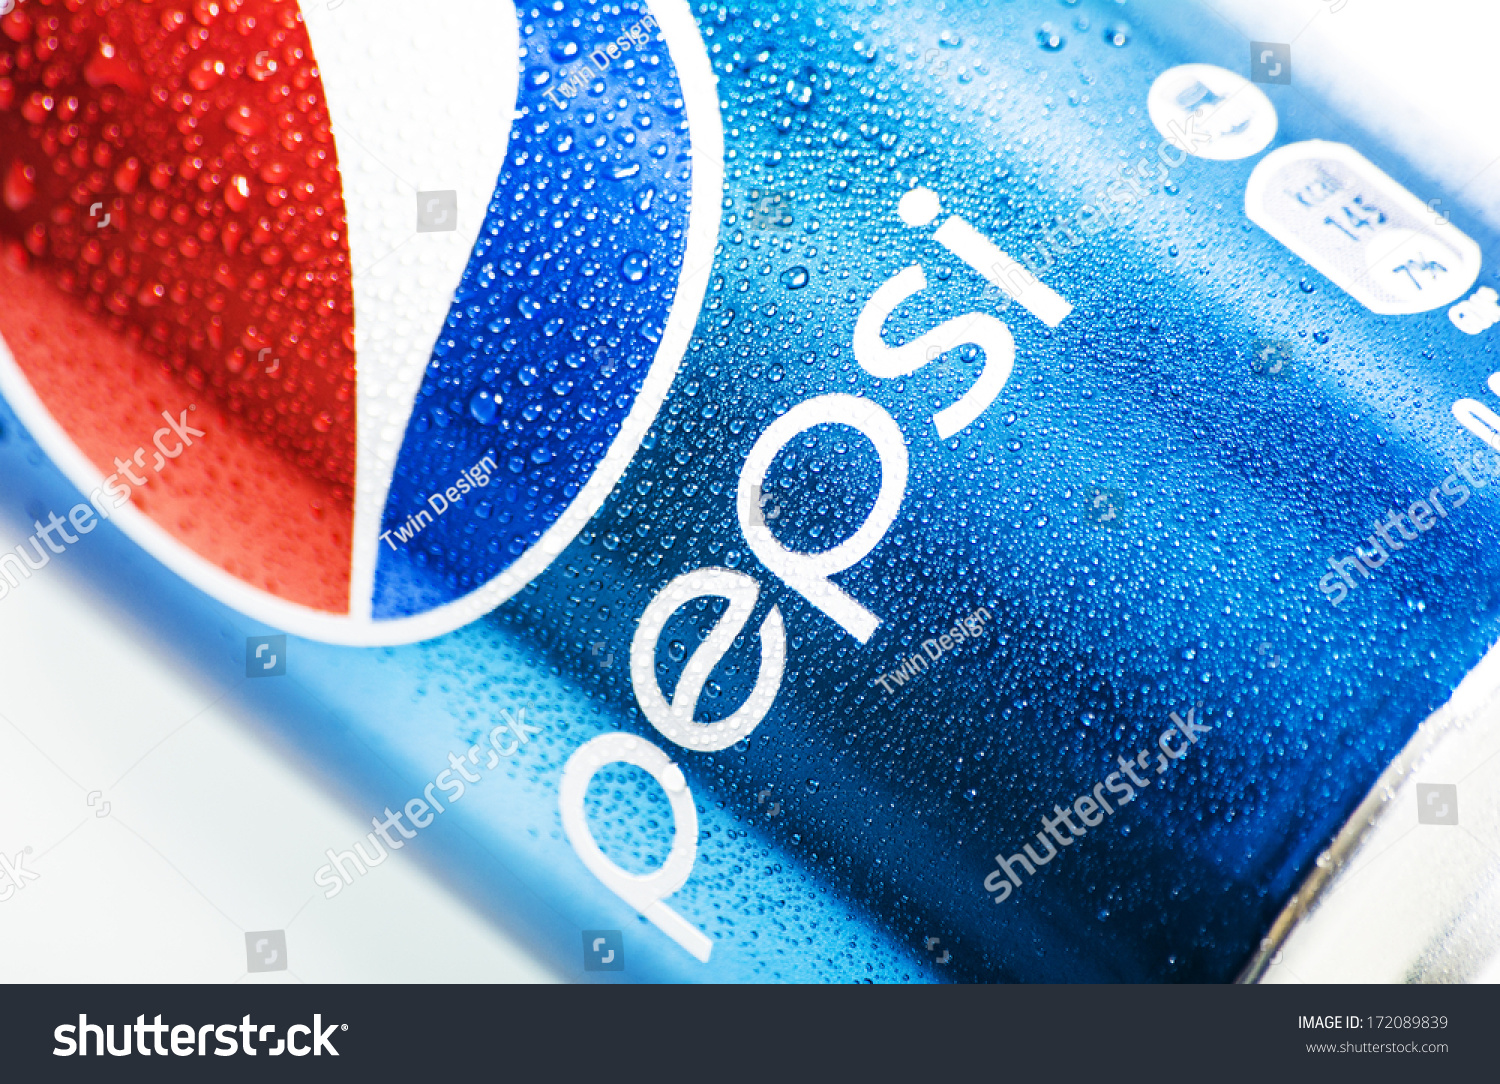 2,817 Pepsi Can Ice Stock Photos, Images & Photography | Shutterstock